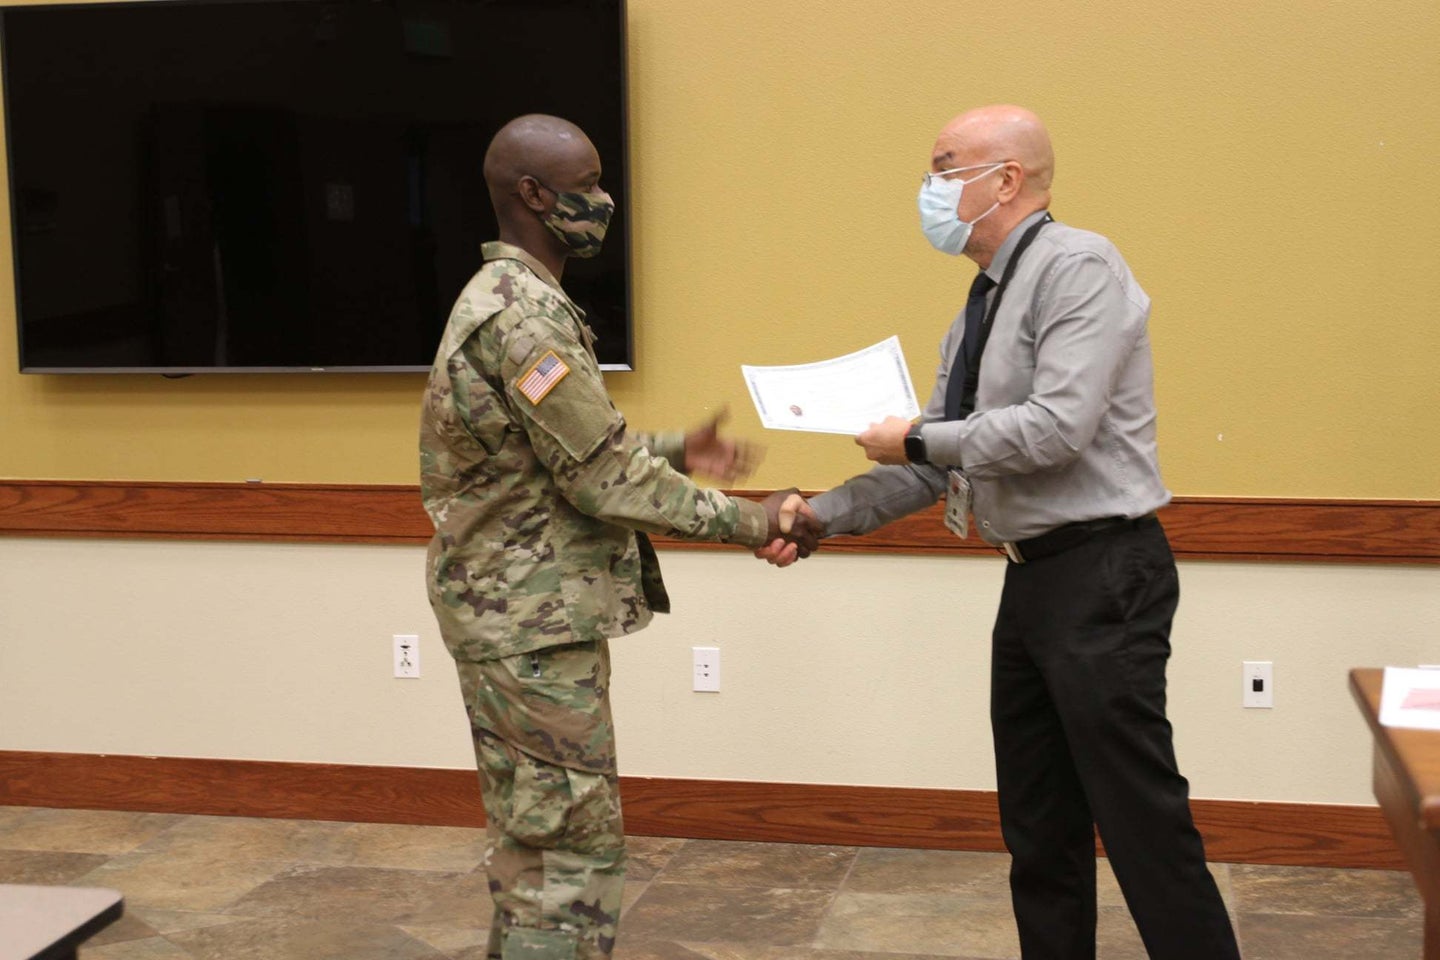 A First Team Trooper assigned to A Co., 1st Squadron, 8th Cavalry Regiment, 2nd Brigade, 1st Cav. Div., earned his citizenship during a ceremony held here, Oct. 20, 2020. Surrounded by his platoon, Spc. Omar Sey officially became an American citizen.